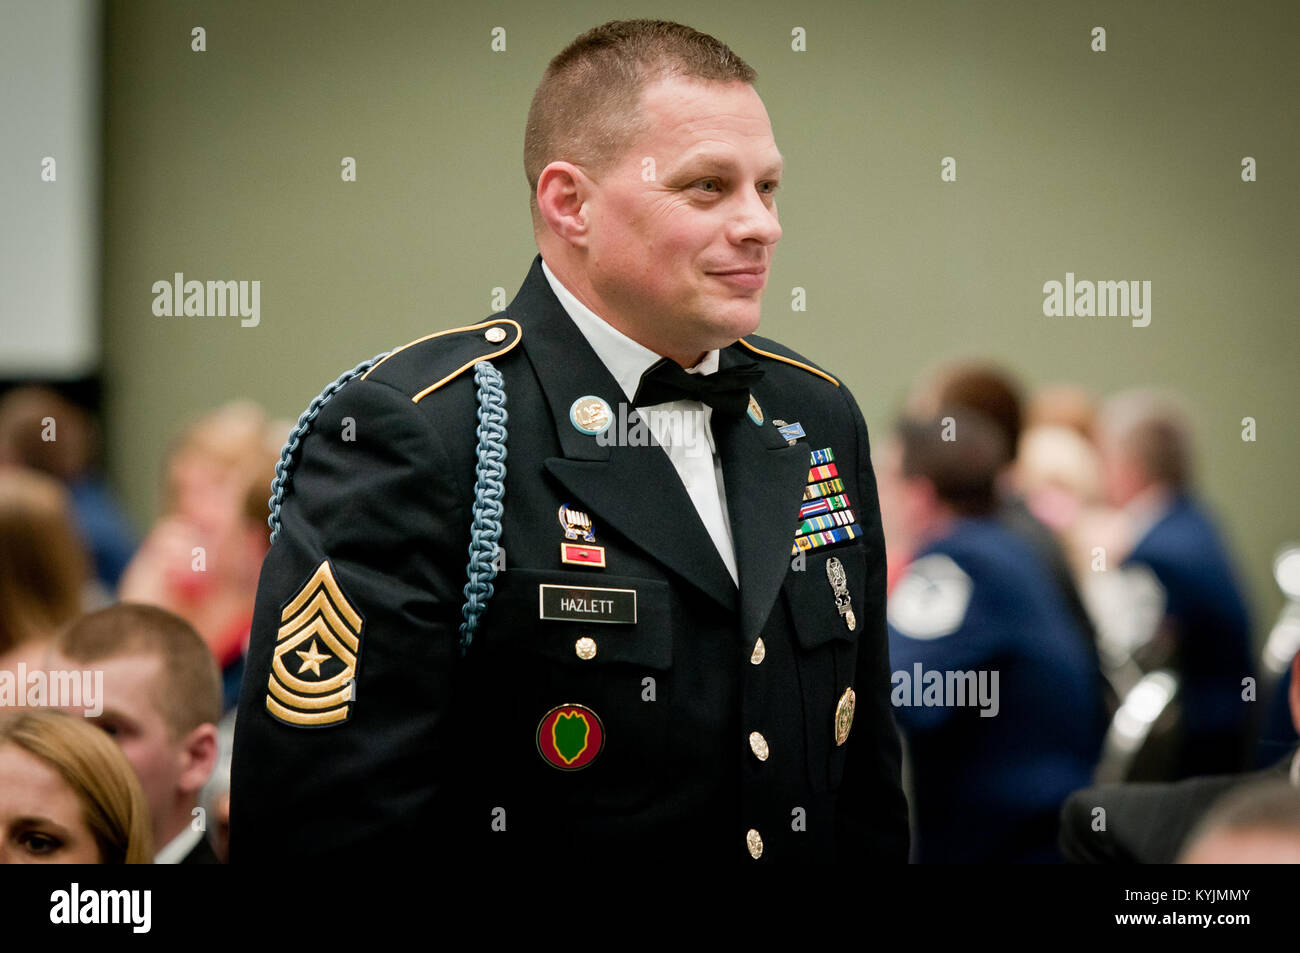 Master Sgt. John Hazlett, operations sergeant major for the Kentucky Army Guard's 149th Brigade, stands at attention during the Outstanding Airman and Soldier of the Year Banquet in Louisville, Ky., on March 16, 2013. Hazlett is the Kentucky Army National Guard’s Outstanding Senior Non-Commissioned Officer of the Year for 2013. (U.S. Air Force photo by Staff Sgt. Maxwell Rechel) Stock Photo